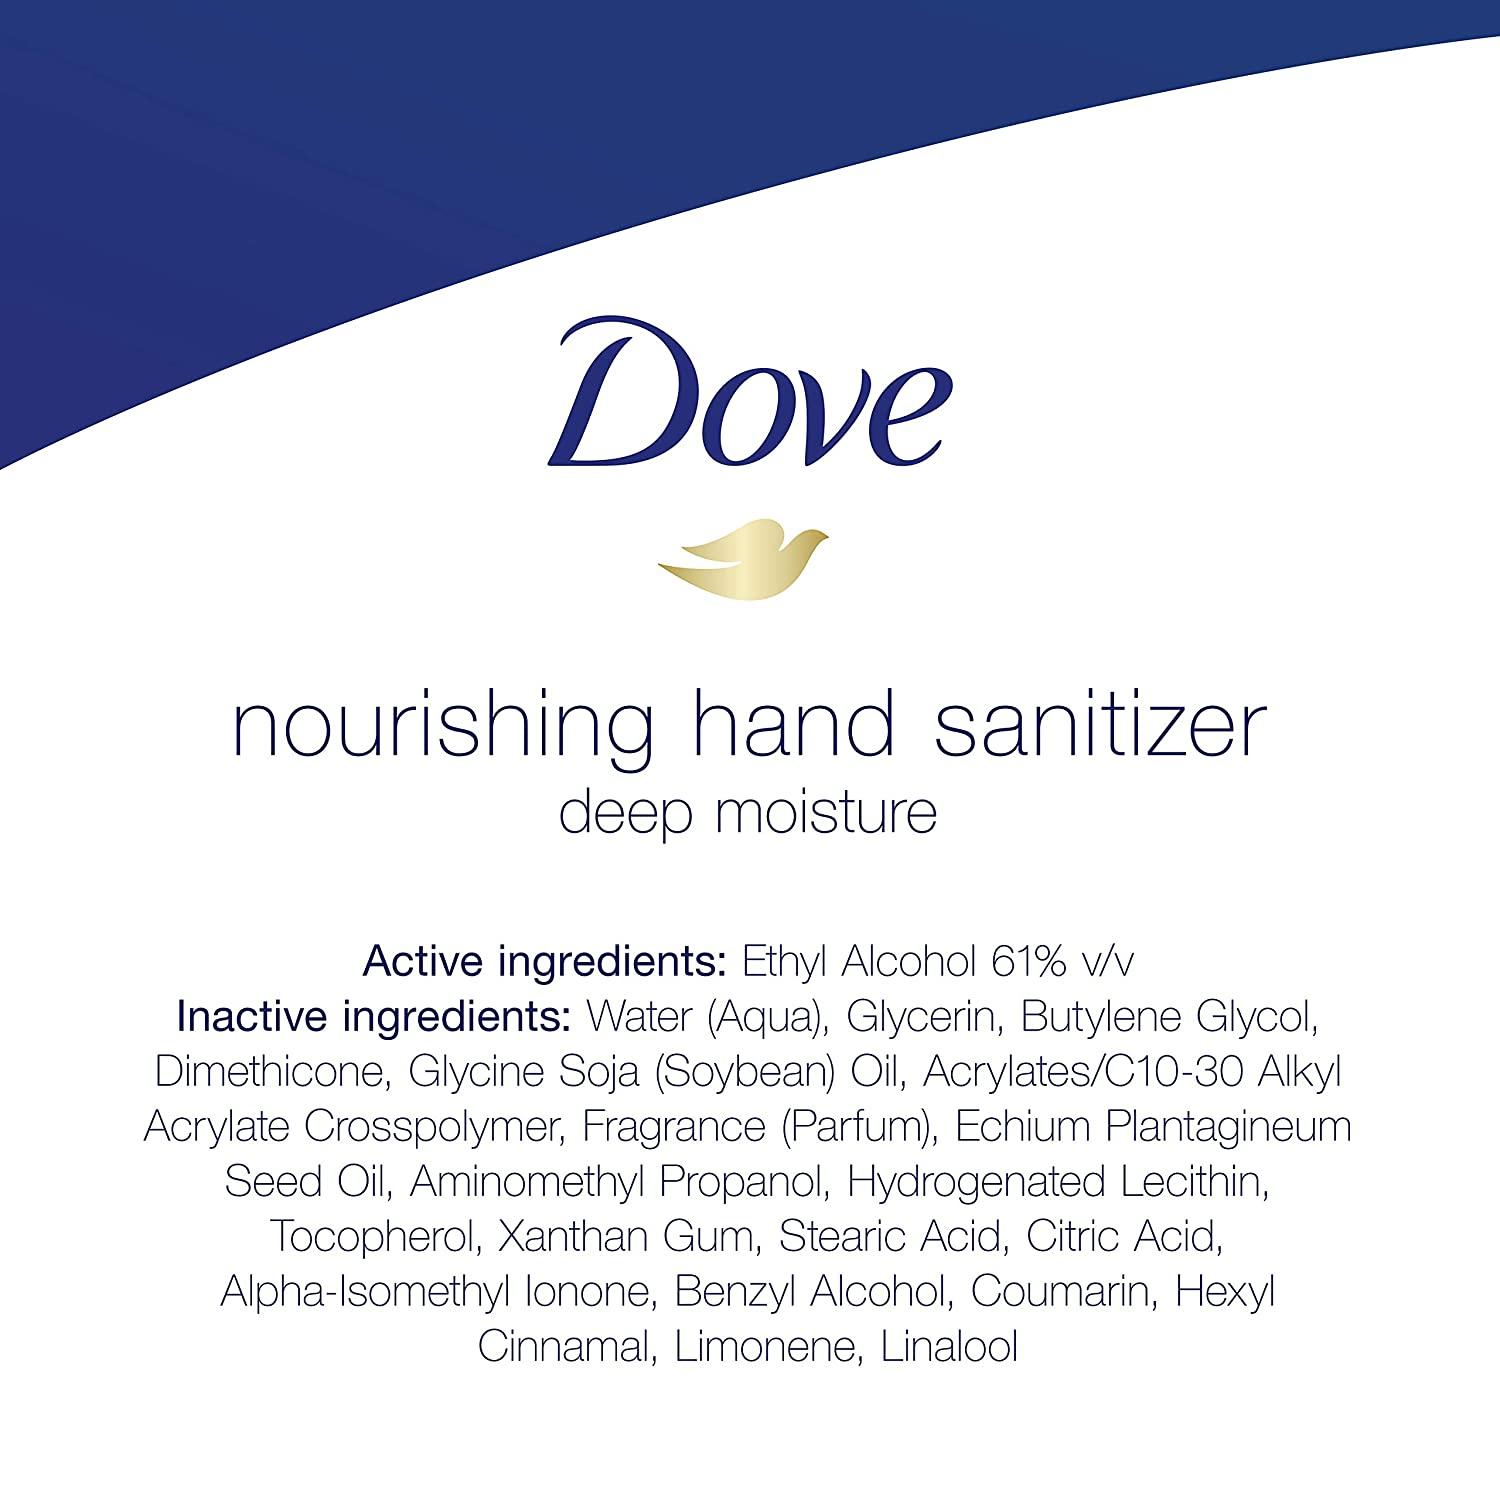 Dove Nourishing Hand Sanitizer Deep Moisture Antibacterial Gel with 61%  Alcohol and Lasting Moisturization For Up to 8 Hours 99.99% Effective  Against Many Germs 8 oz 